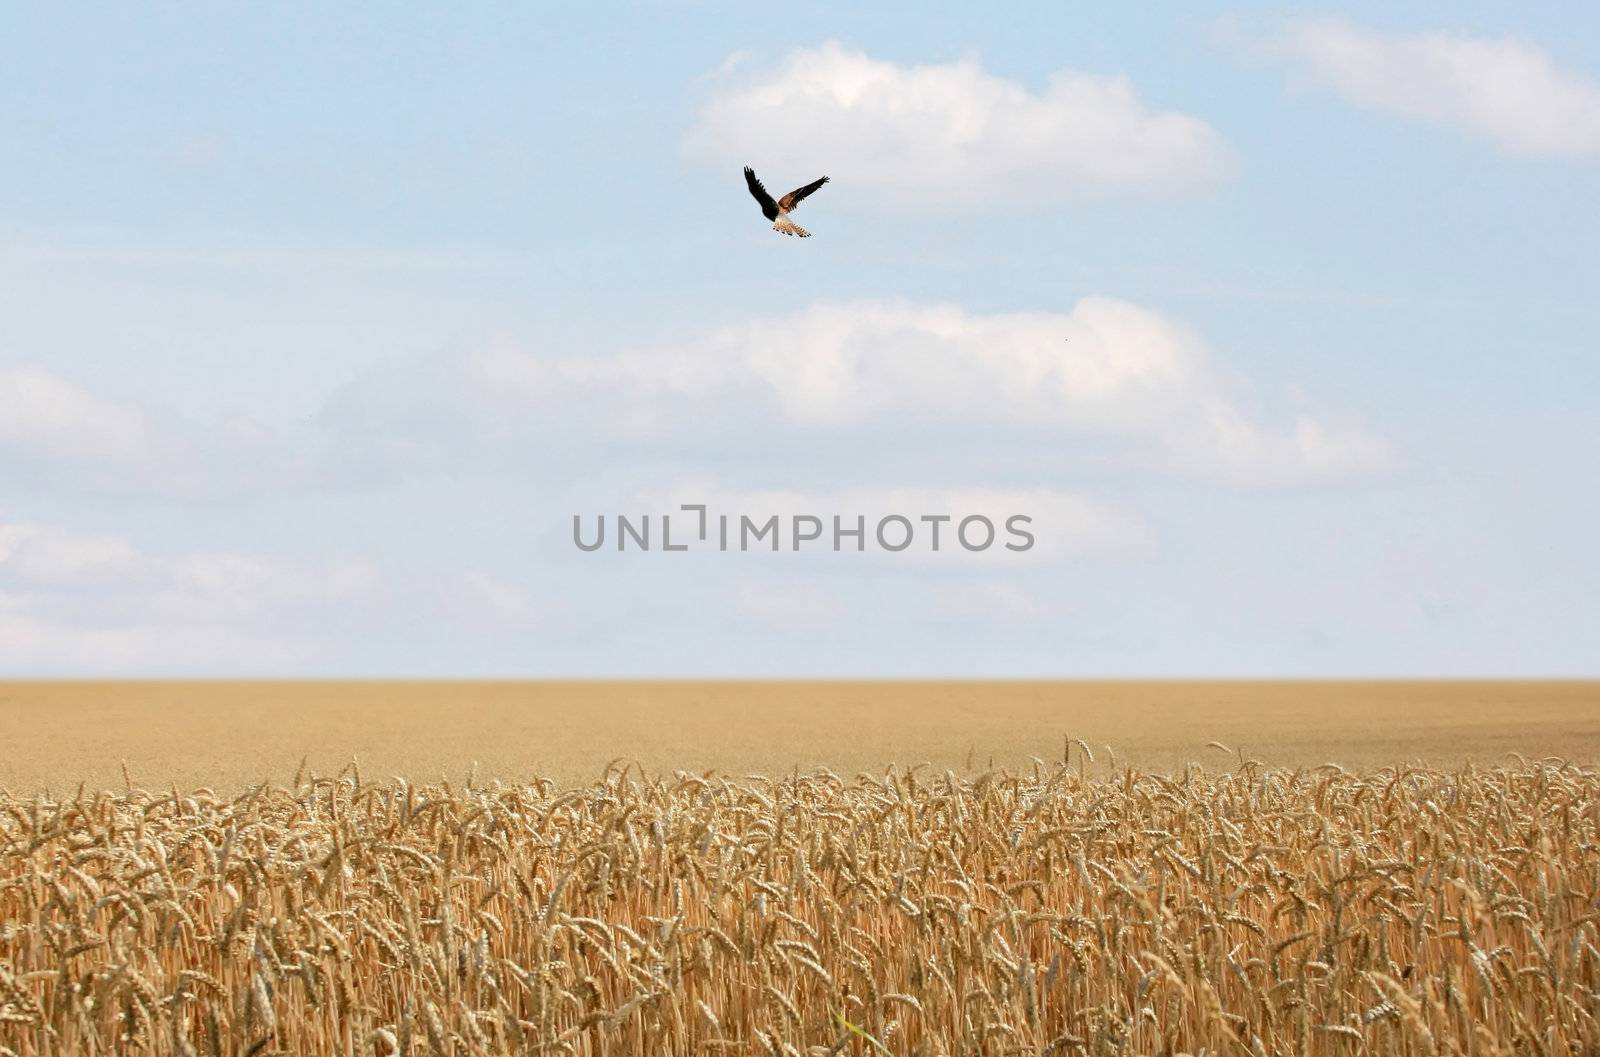 This image shows a cornfield with a flying bird